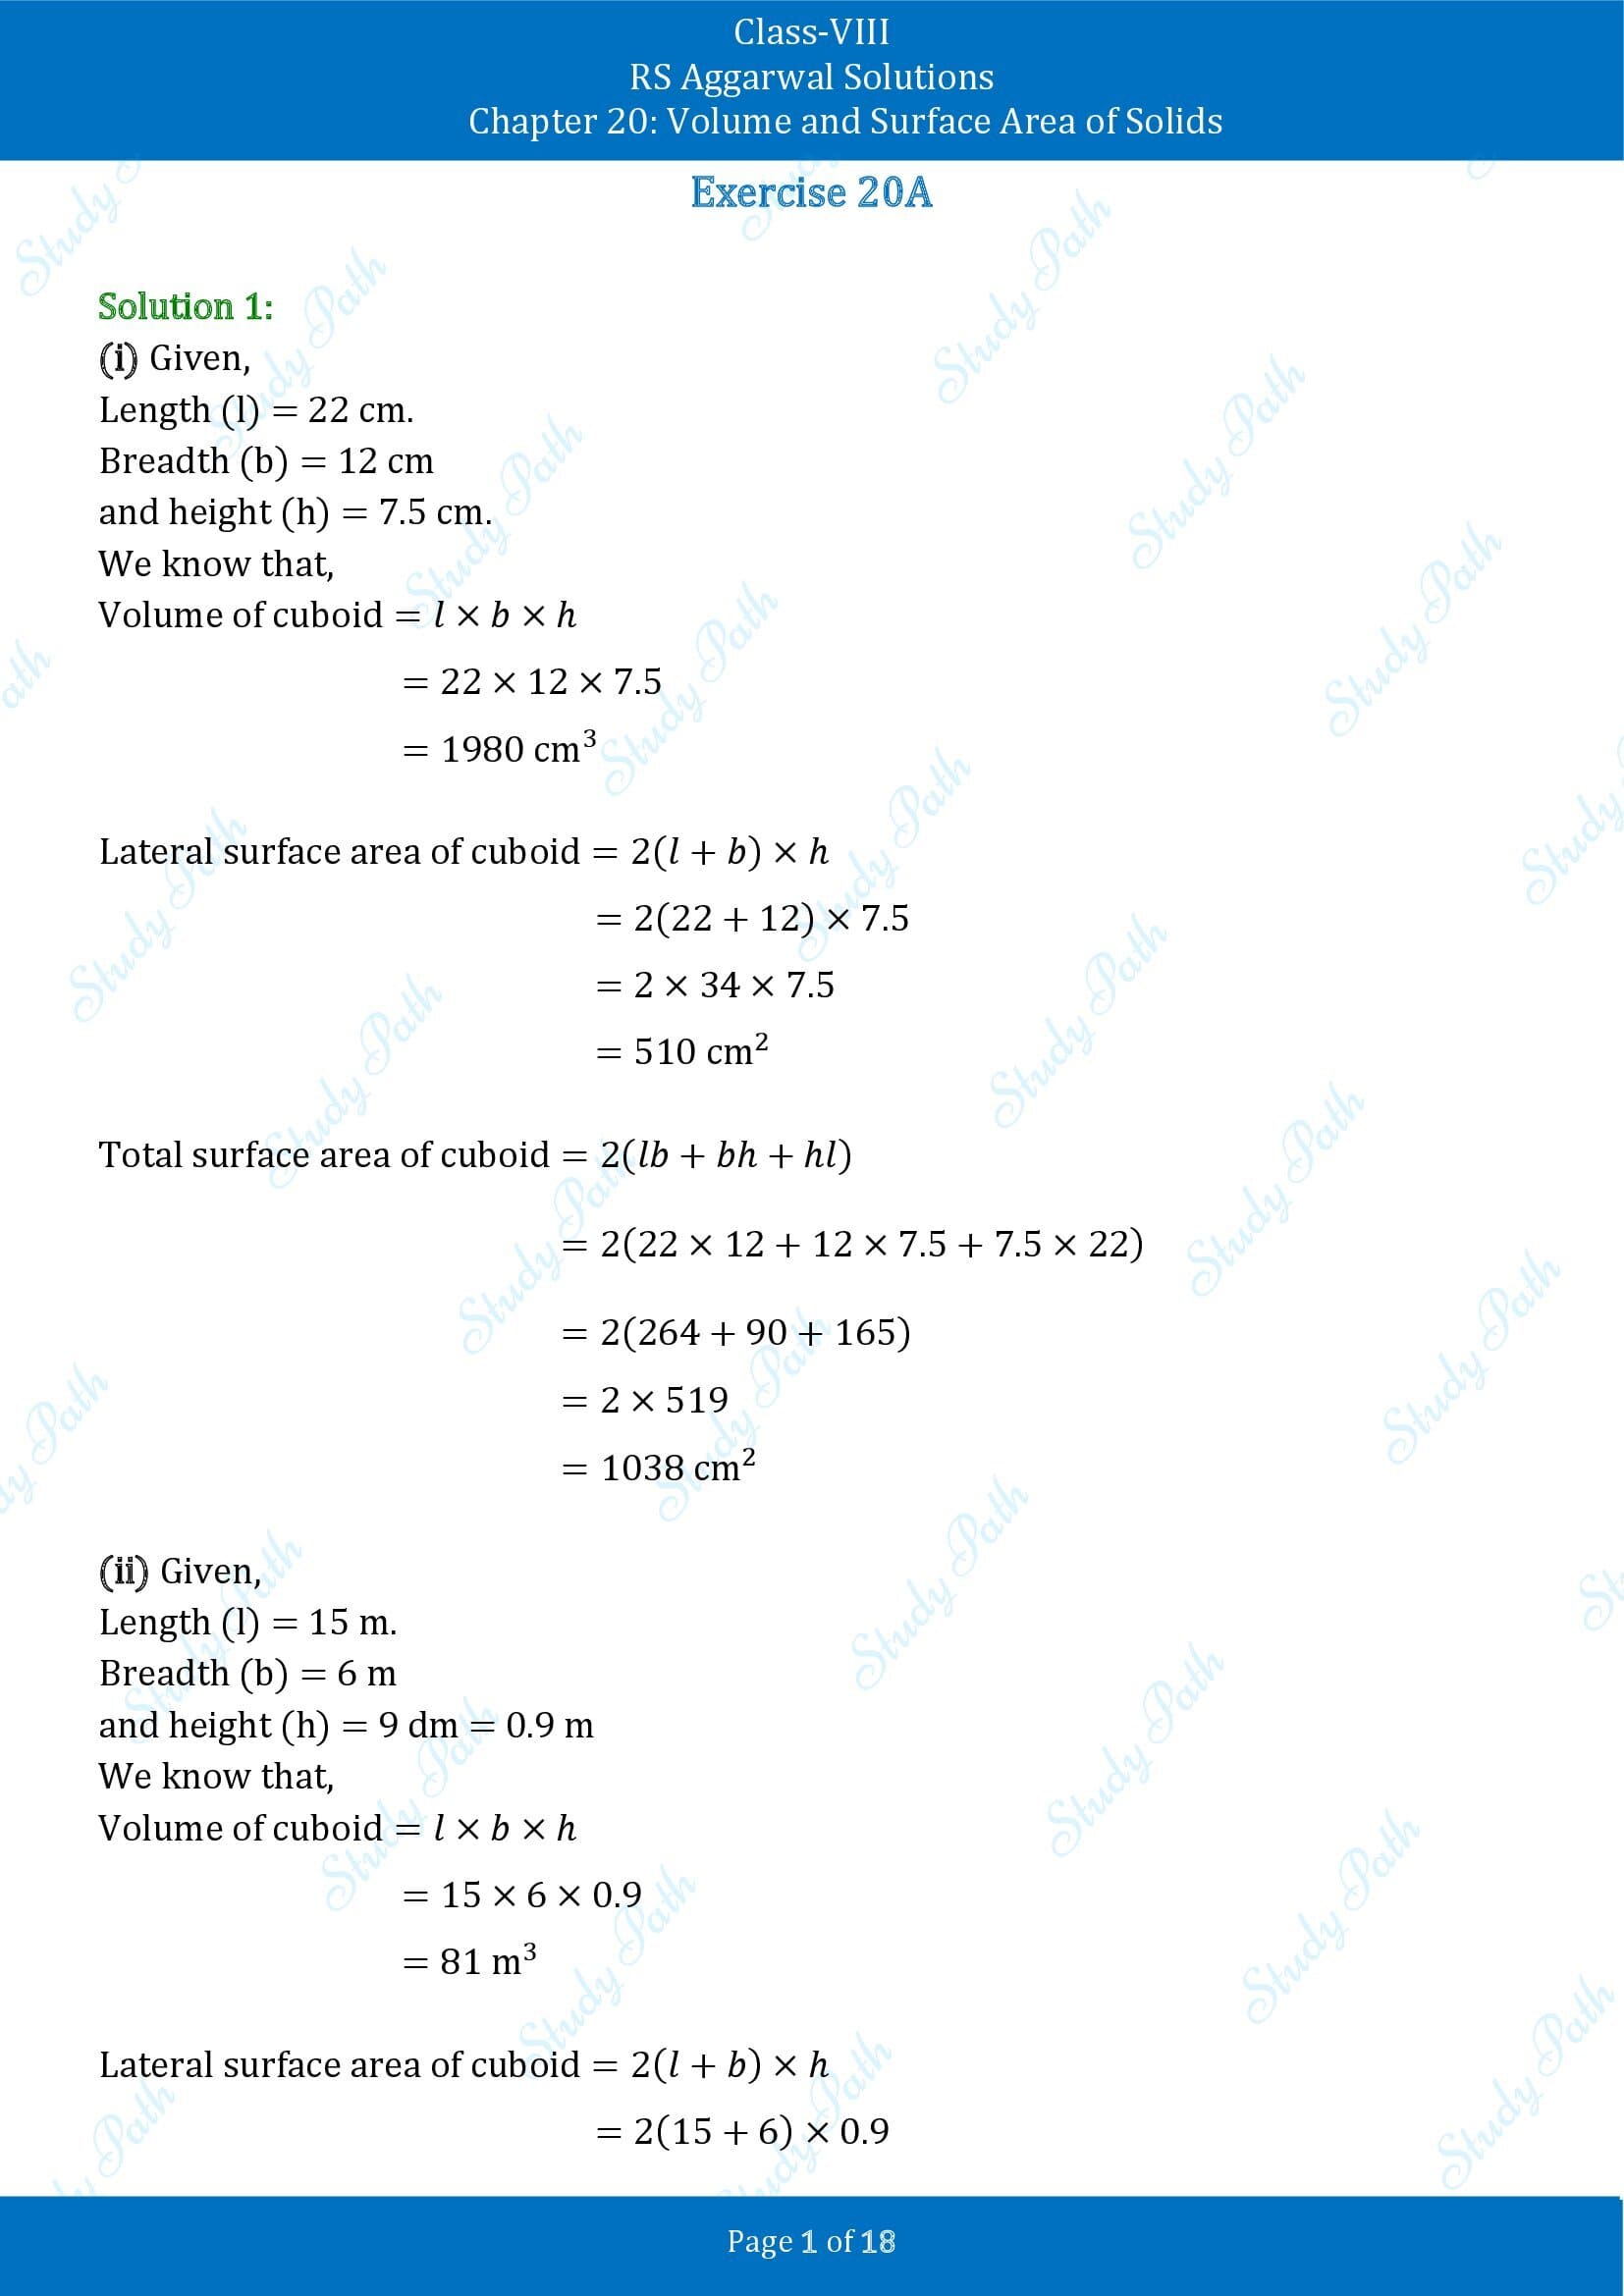 RS Aggarwal Solutions Class 8 Chapter 20 Volume and Surface Area of Solids Exercise 20A 00001